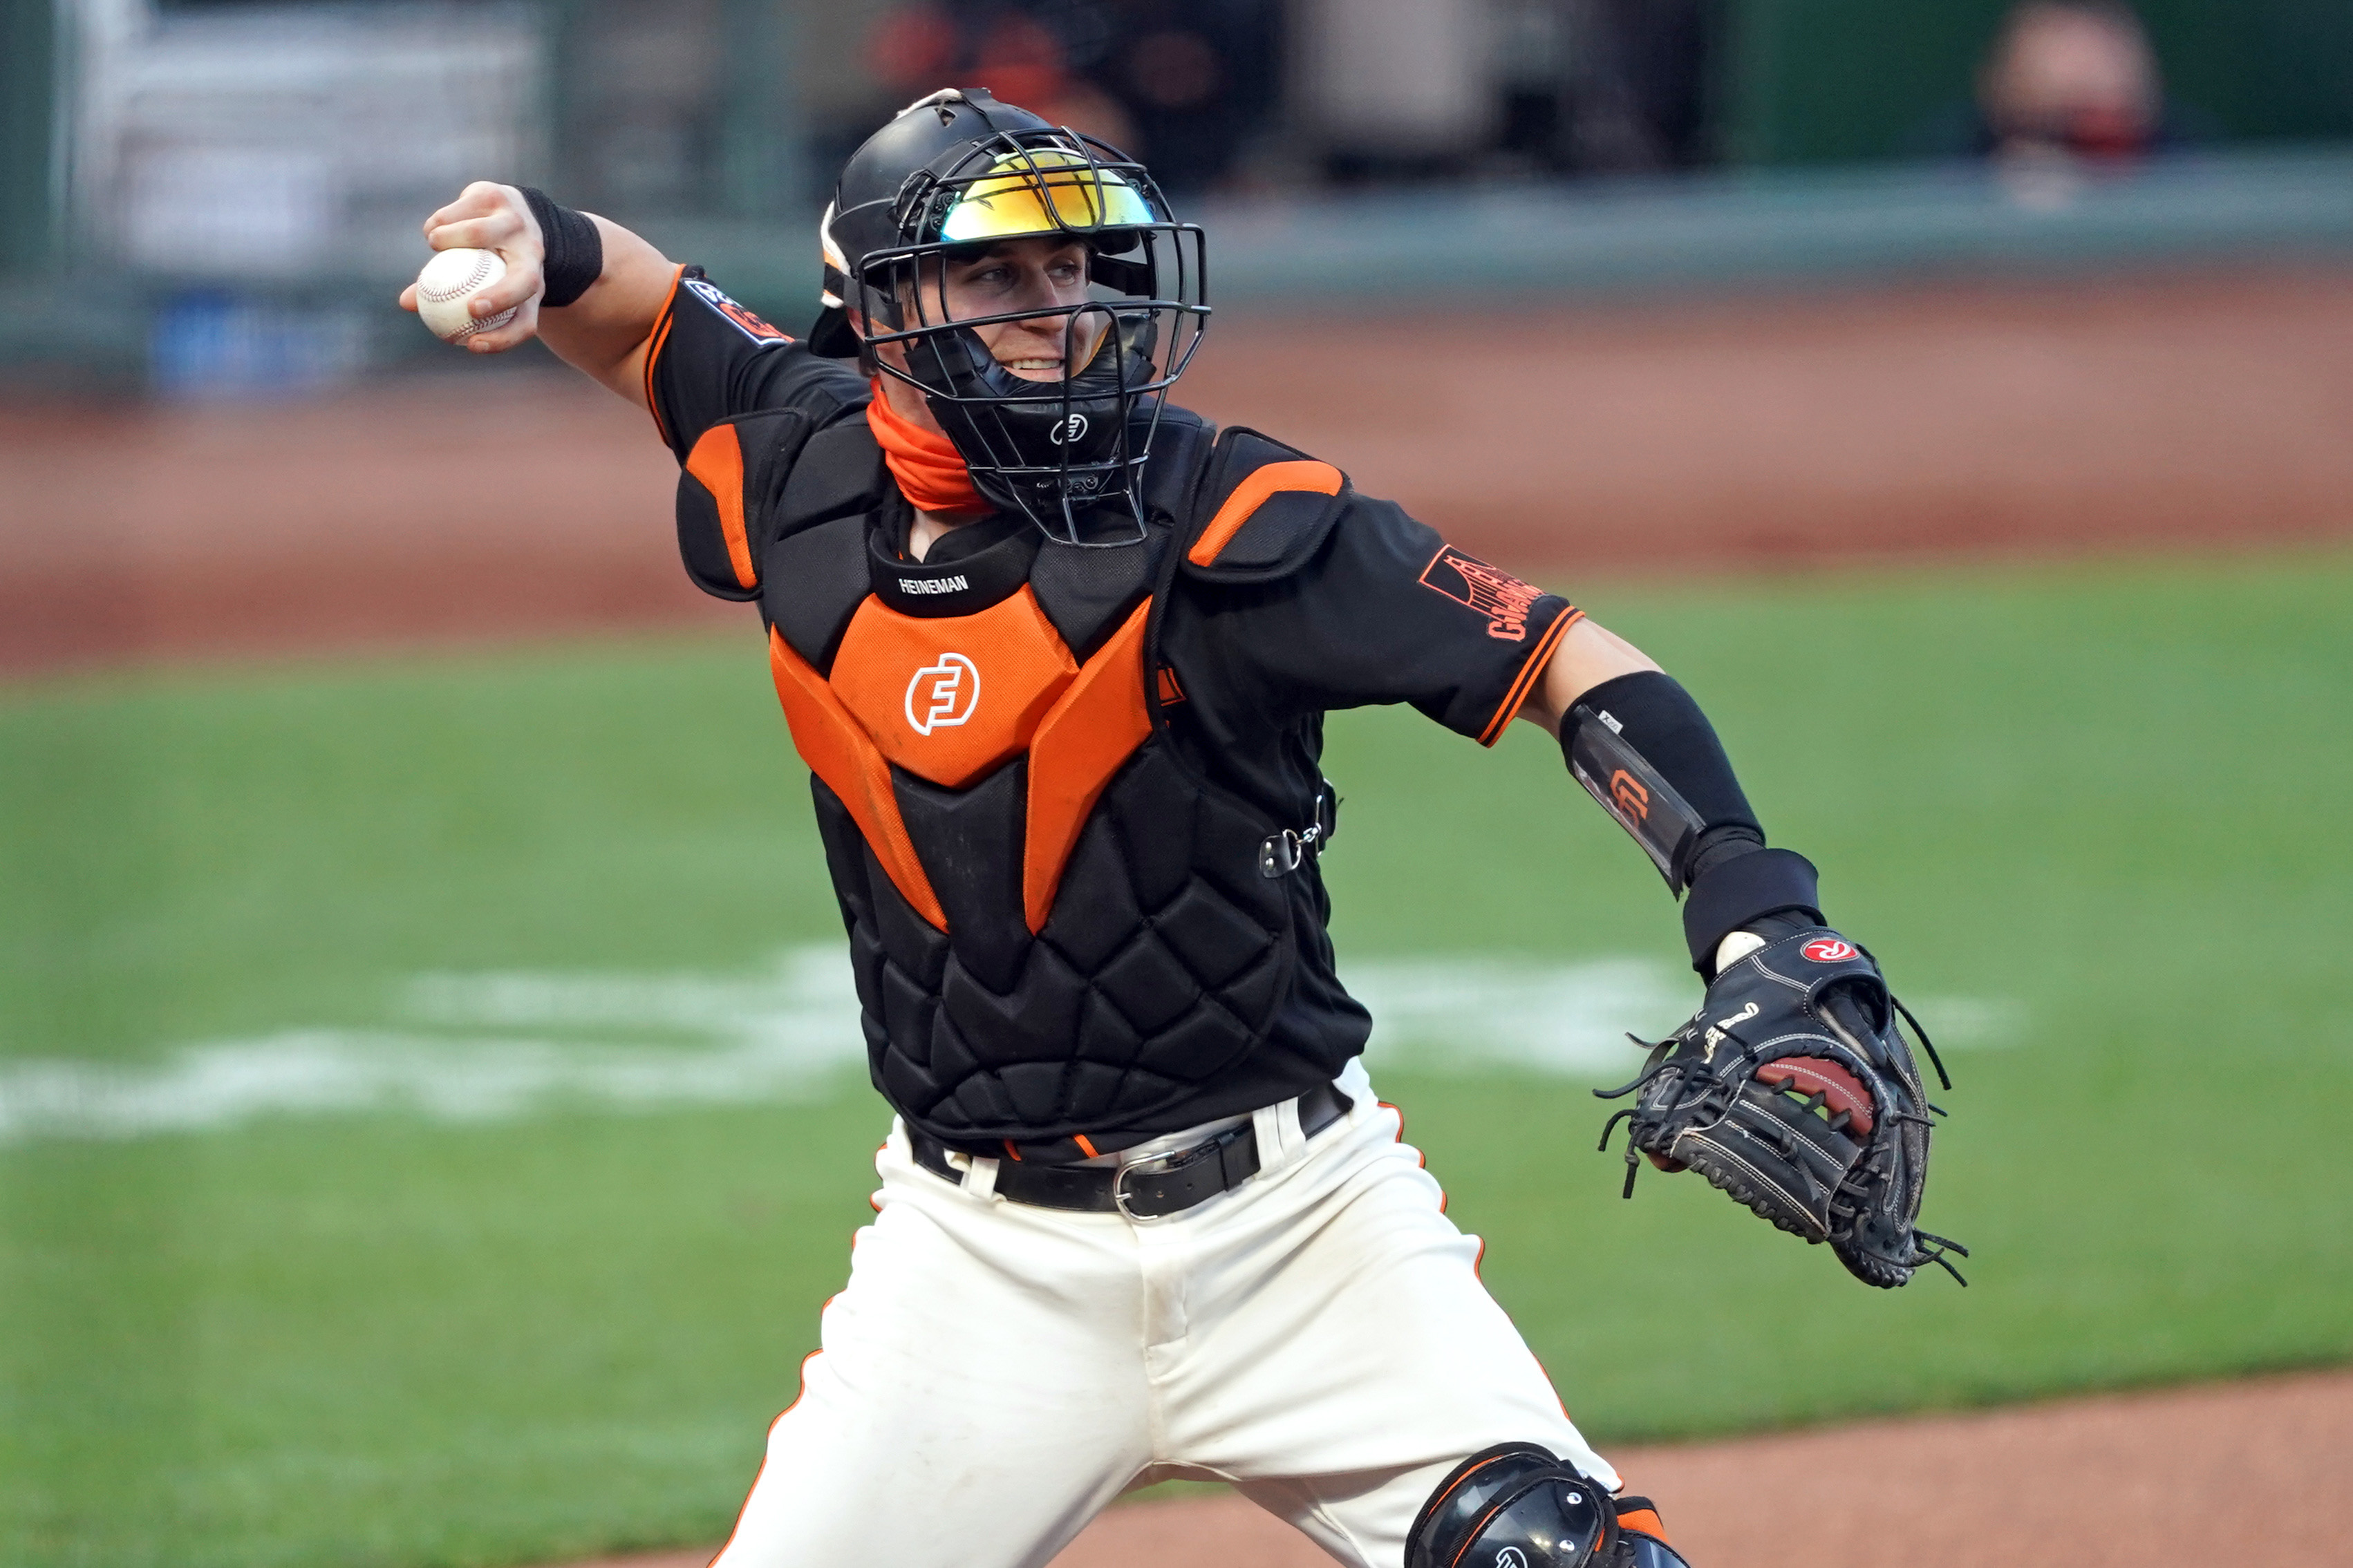 SF Giants catcher Tyler Heineman throws the ball to first base to complete a strikeout during the second inning against the Texas Rangers at Oracle Park. (2020)